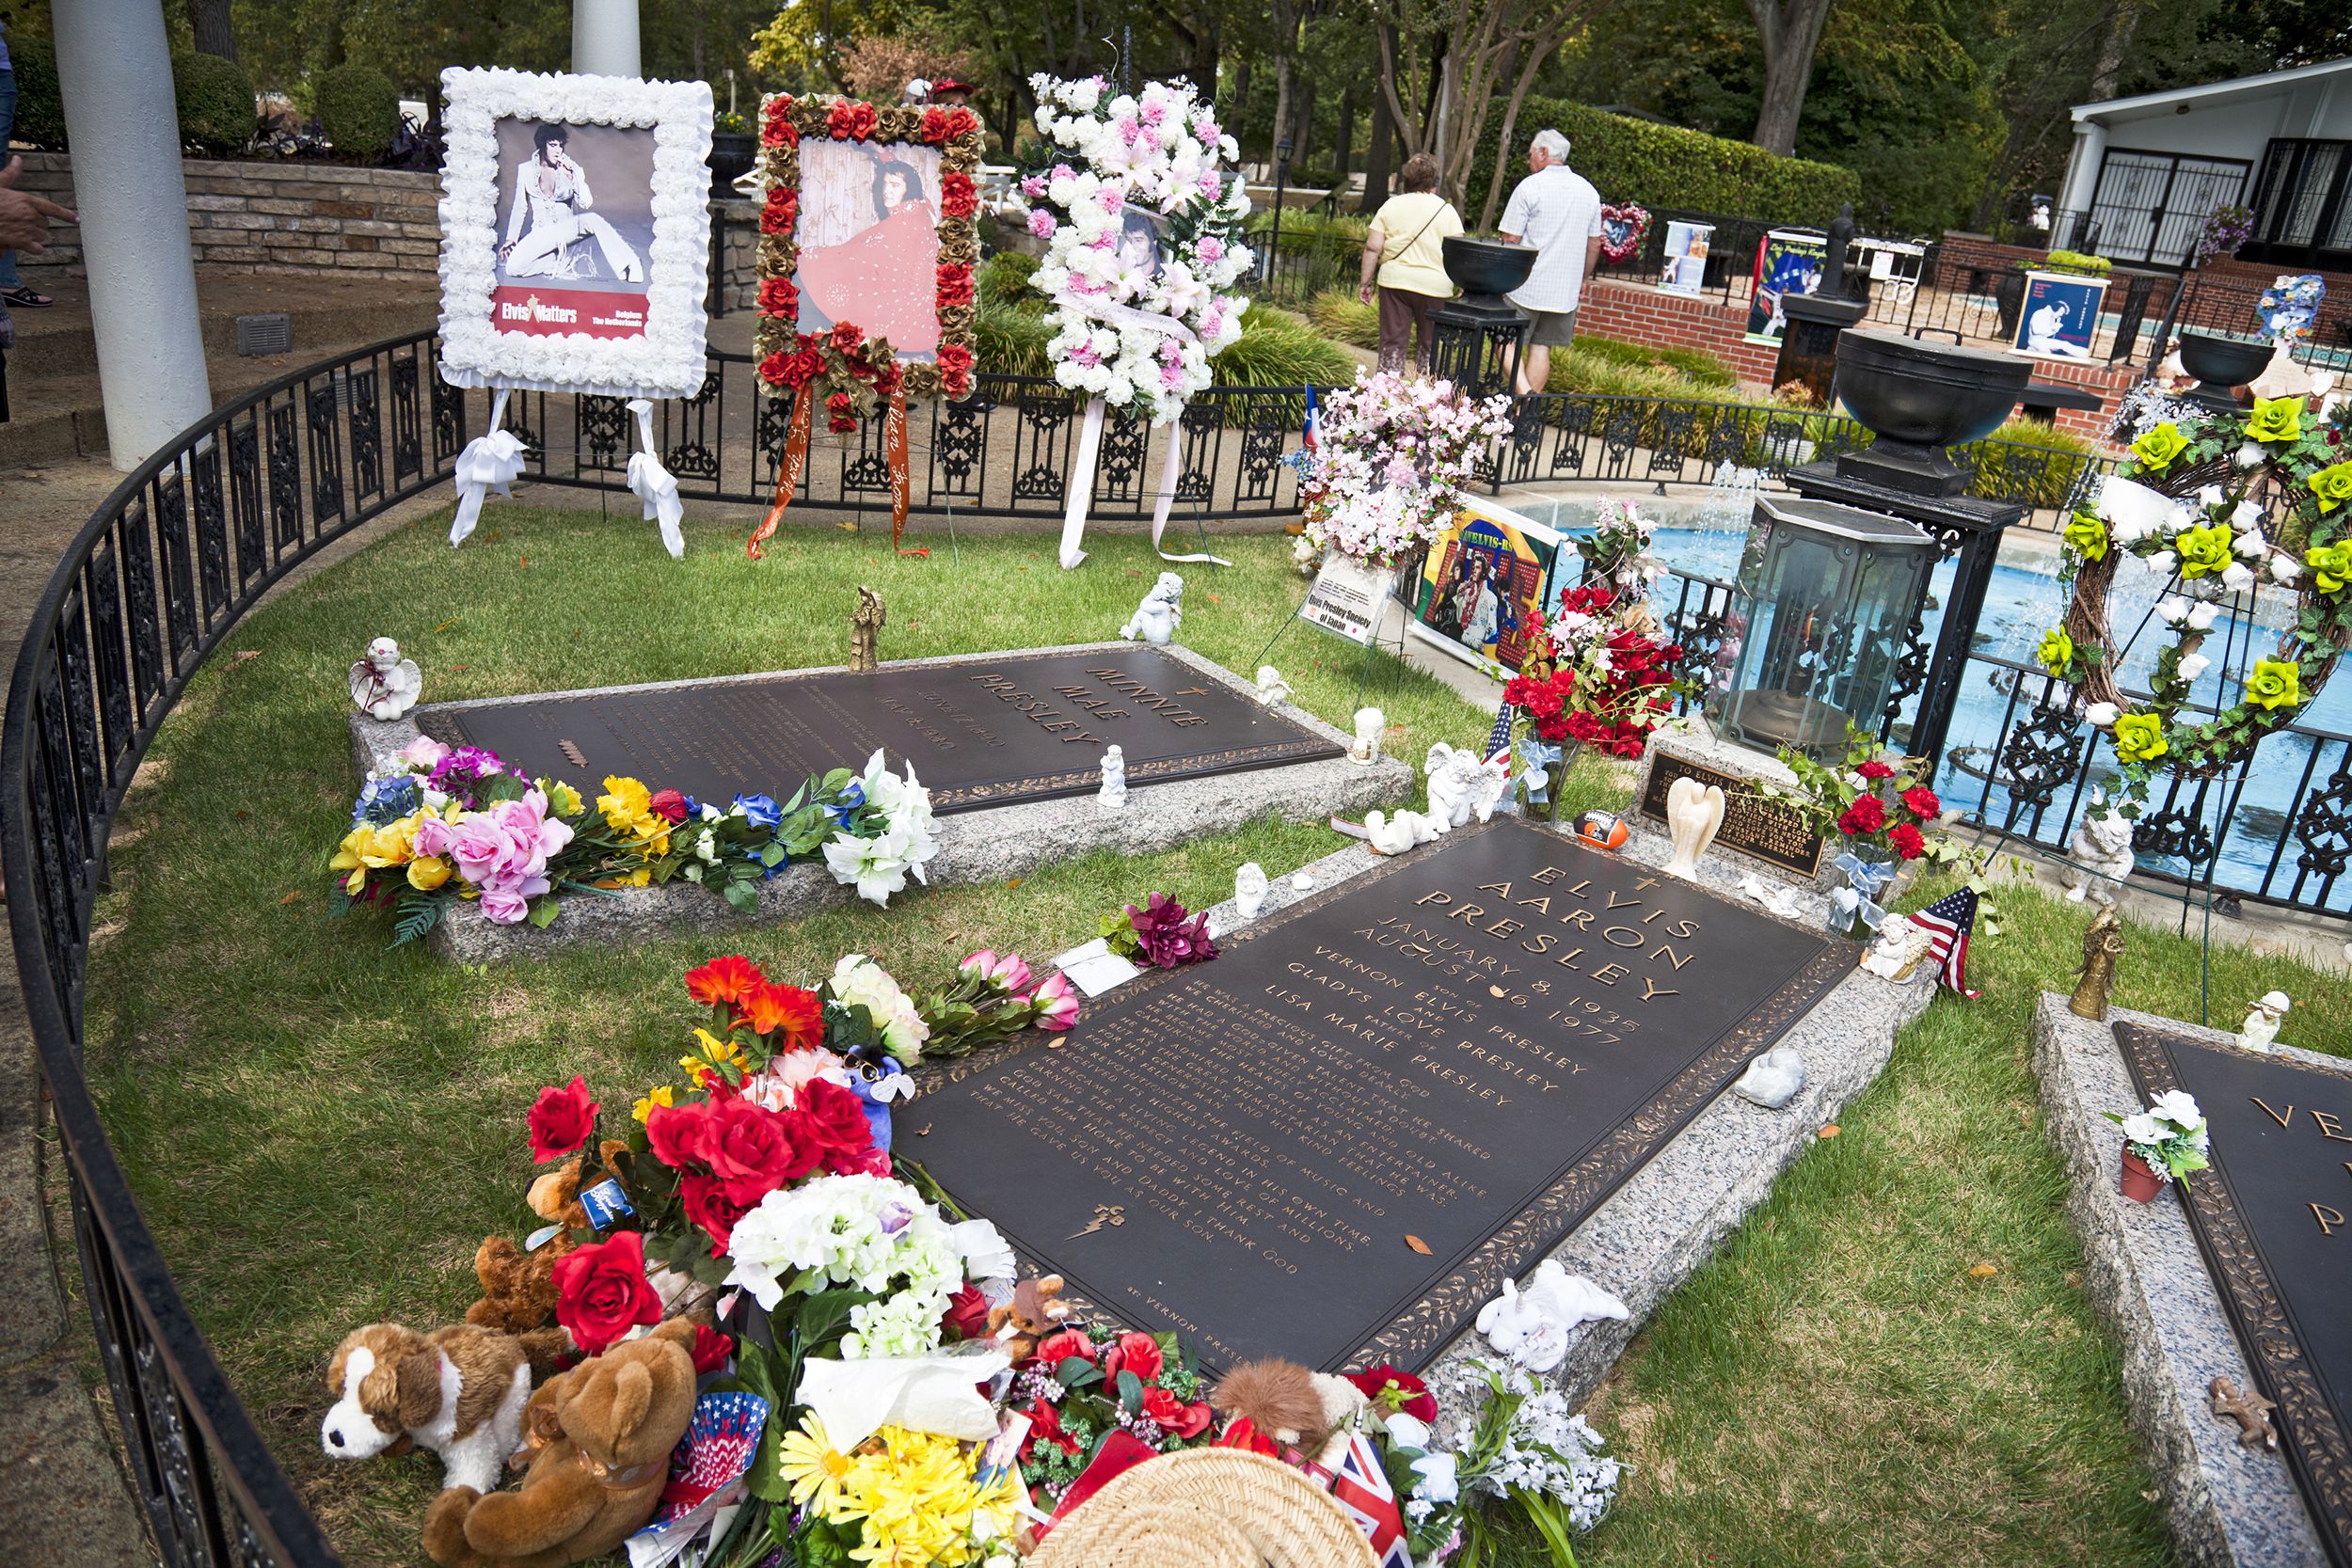 <p>One of the additions Elvis made to Graceland was a secluded meditation garden, featuring plants and fountains, where he liked to reflect on life. The meditation garden also became his final resting place, after thieves tried to steal his remains for ransom shortly after his death. </p><p><b>Related:</b> <a href="https://blog.cheapism.com/famous-grave-sites-18130/">50 Famous Gravesites Worth Seeing Around the World</a></p>